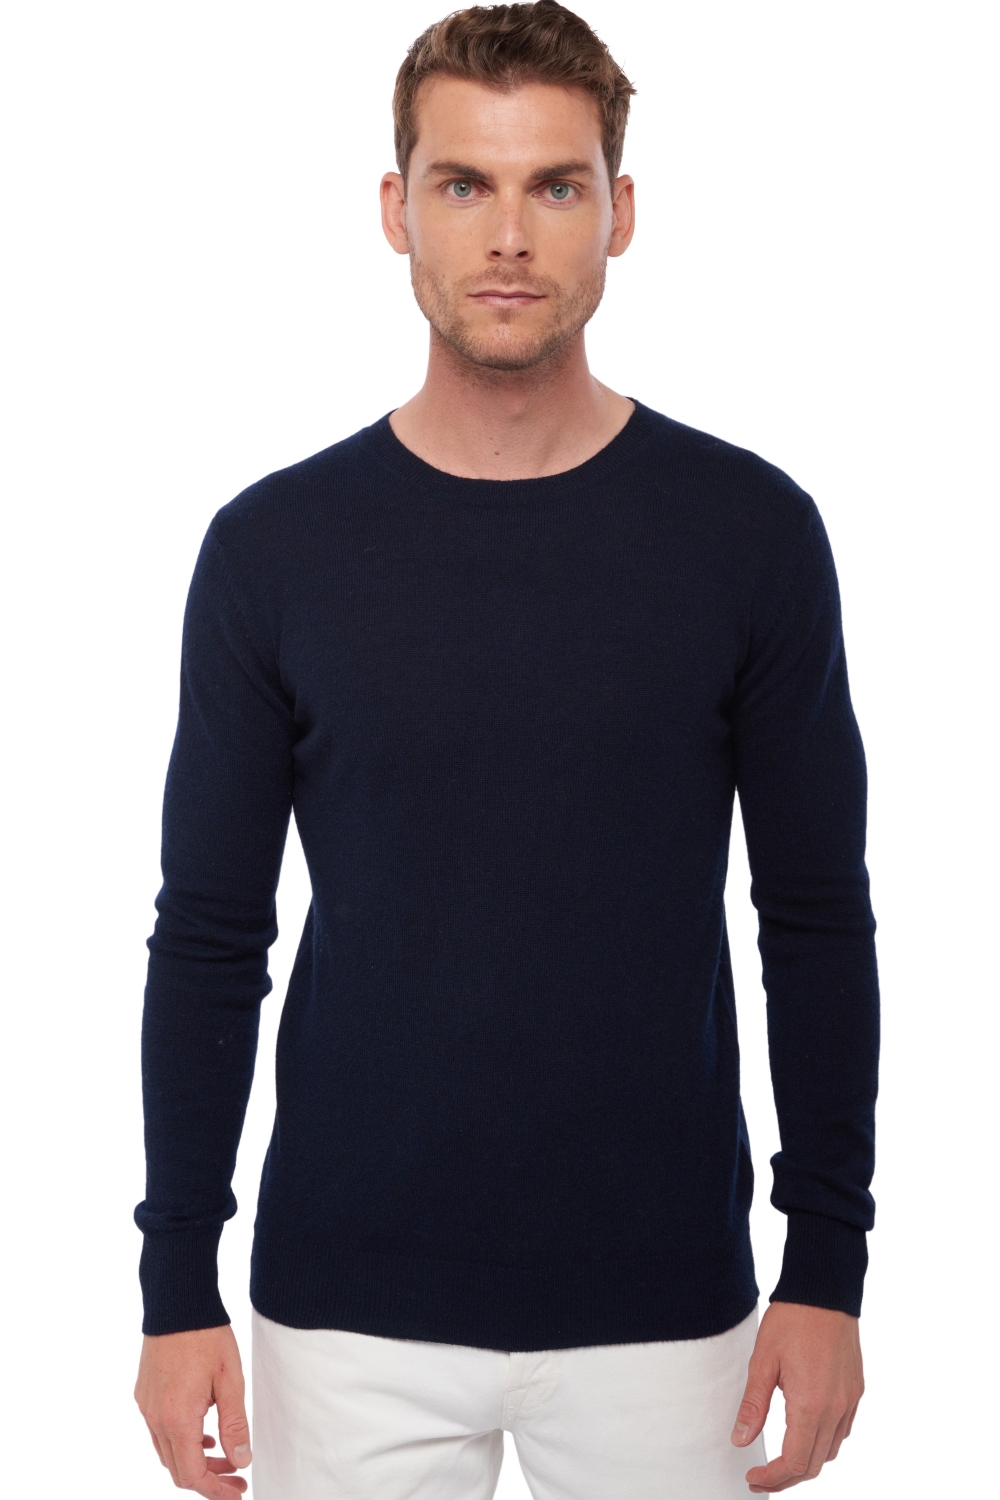 Cashmere men basic sweaters at low prices tao first dress blue xl